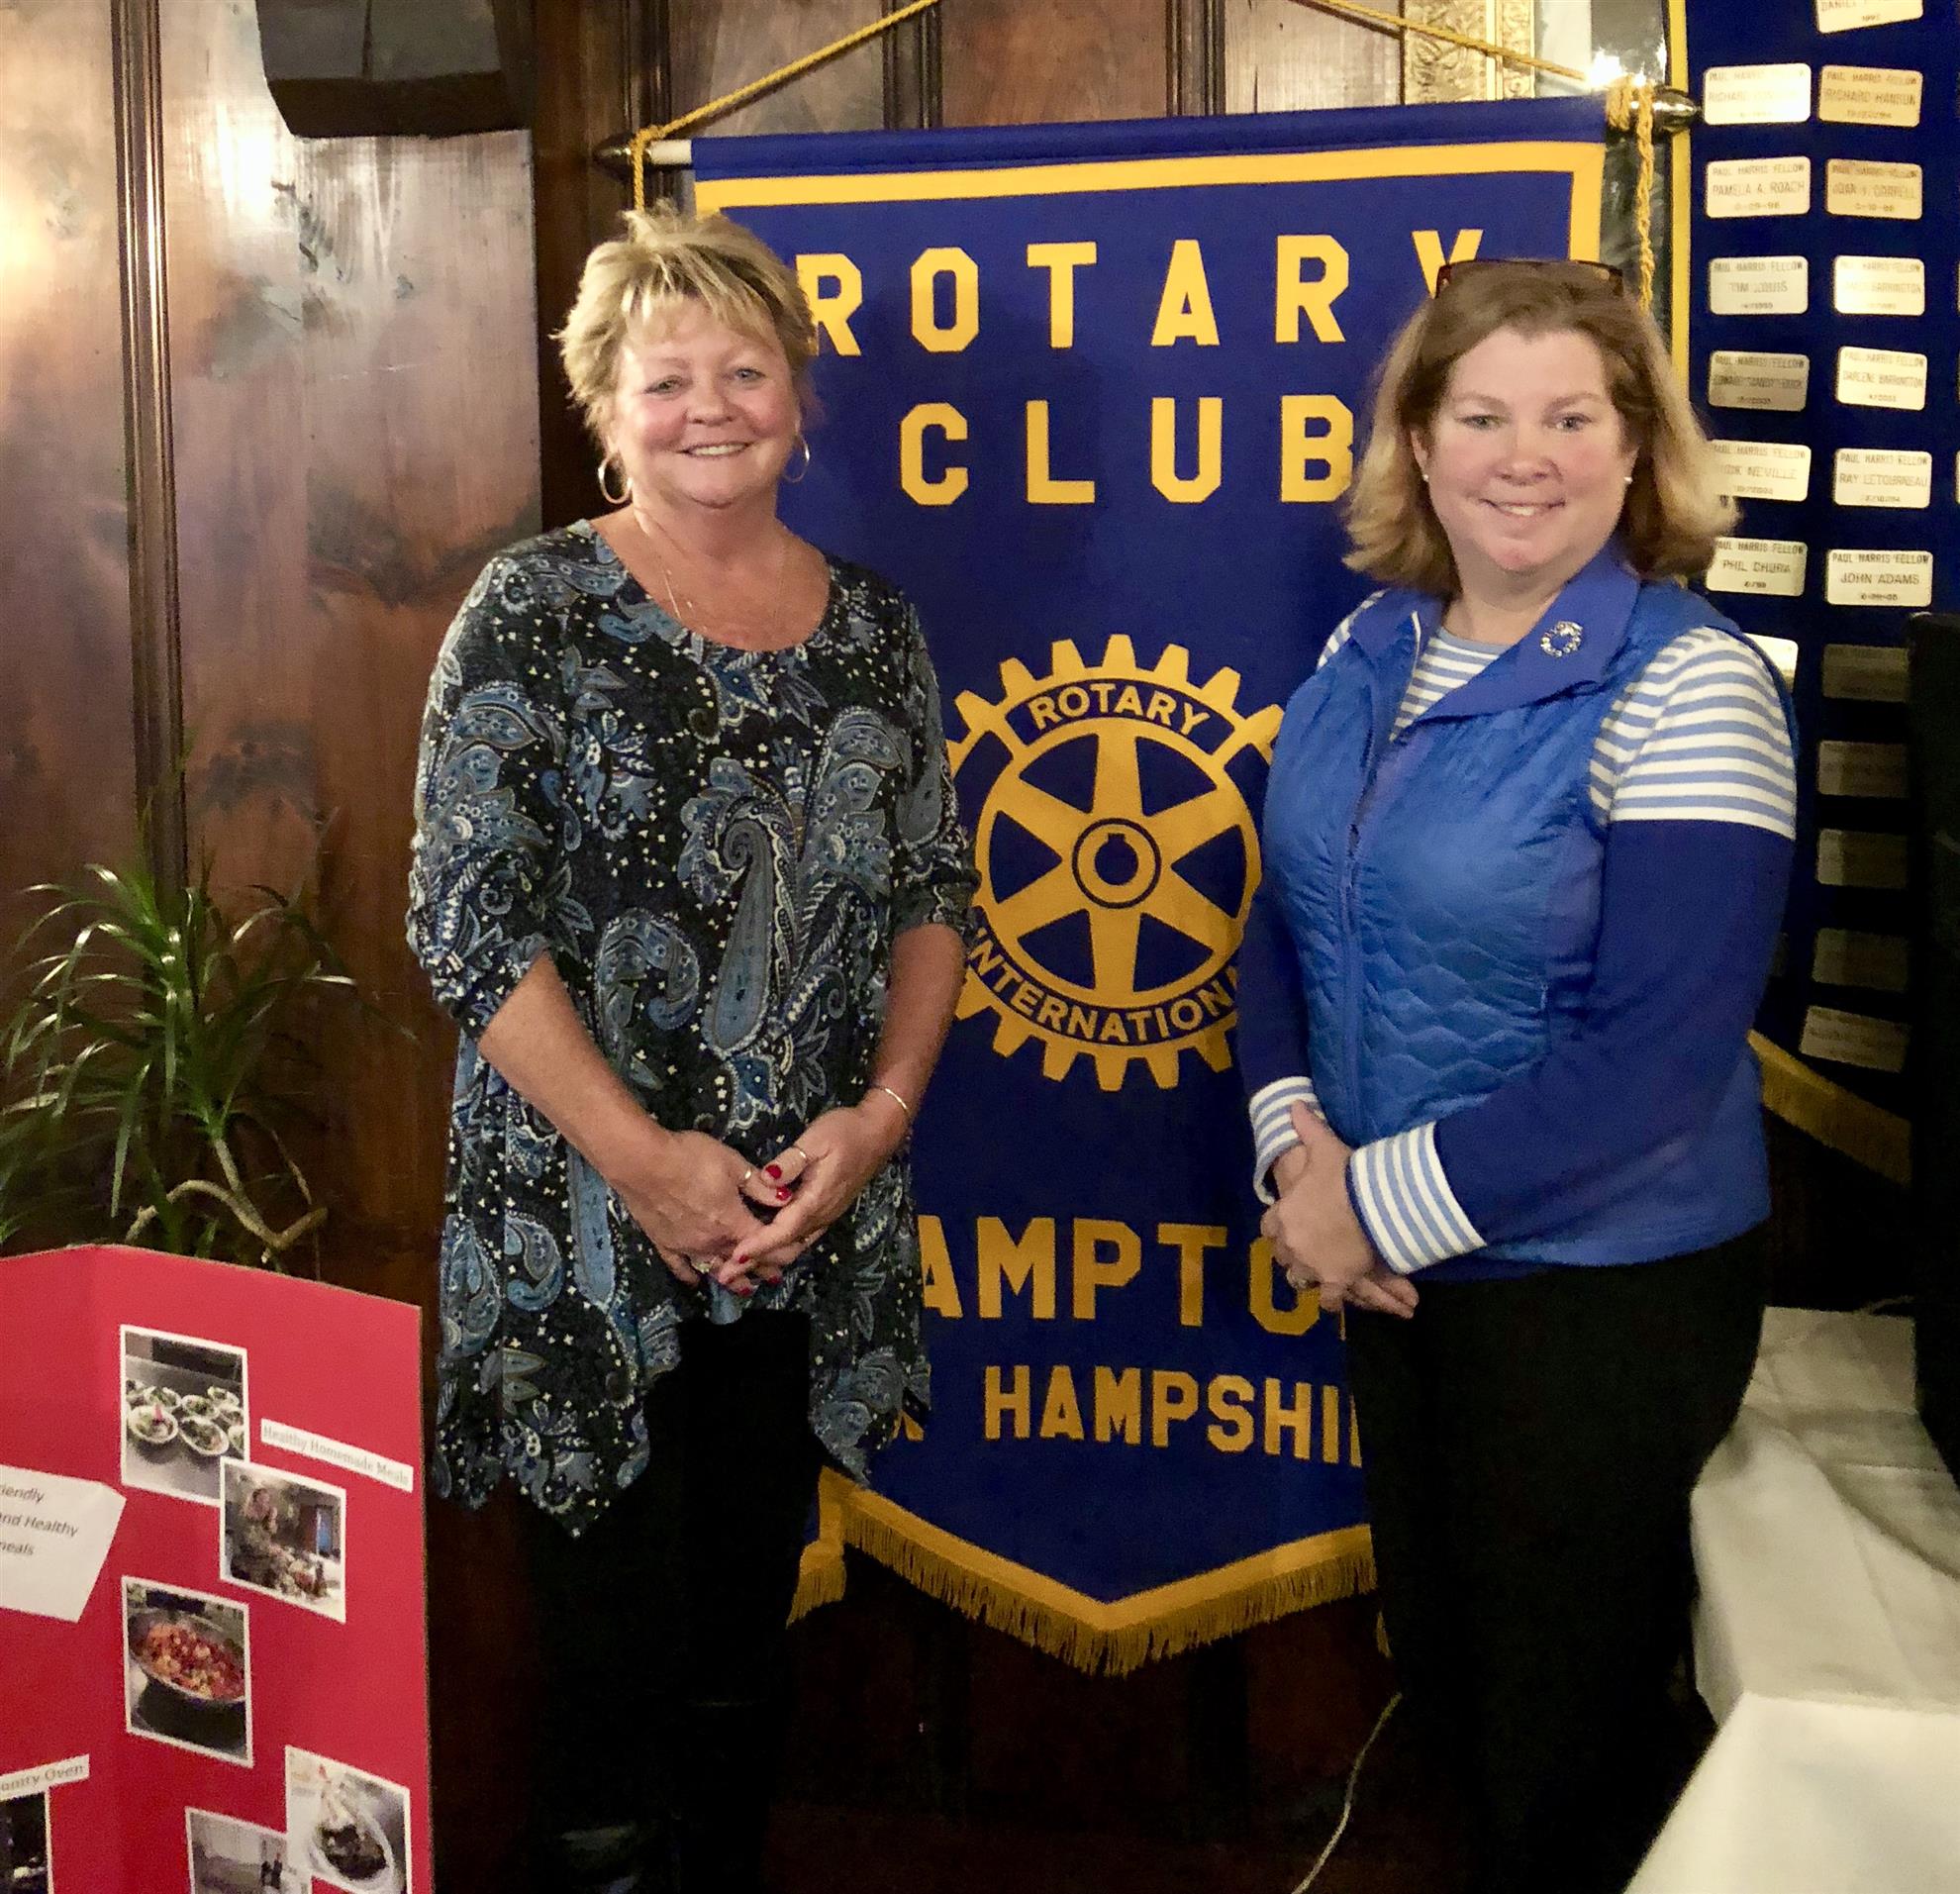 Rotary Club of Dover & Families attend the District 7780 Annual